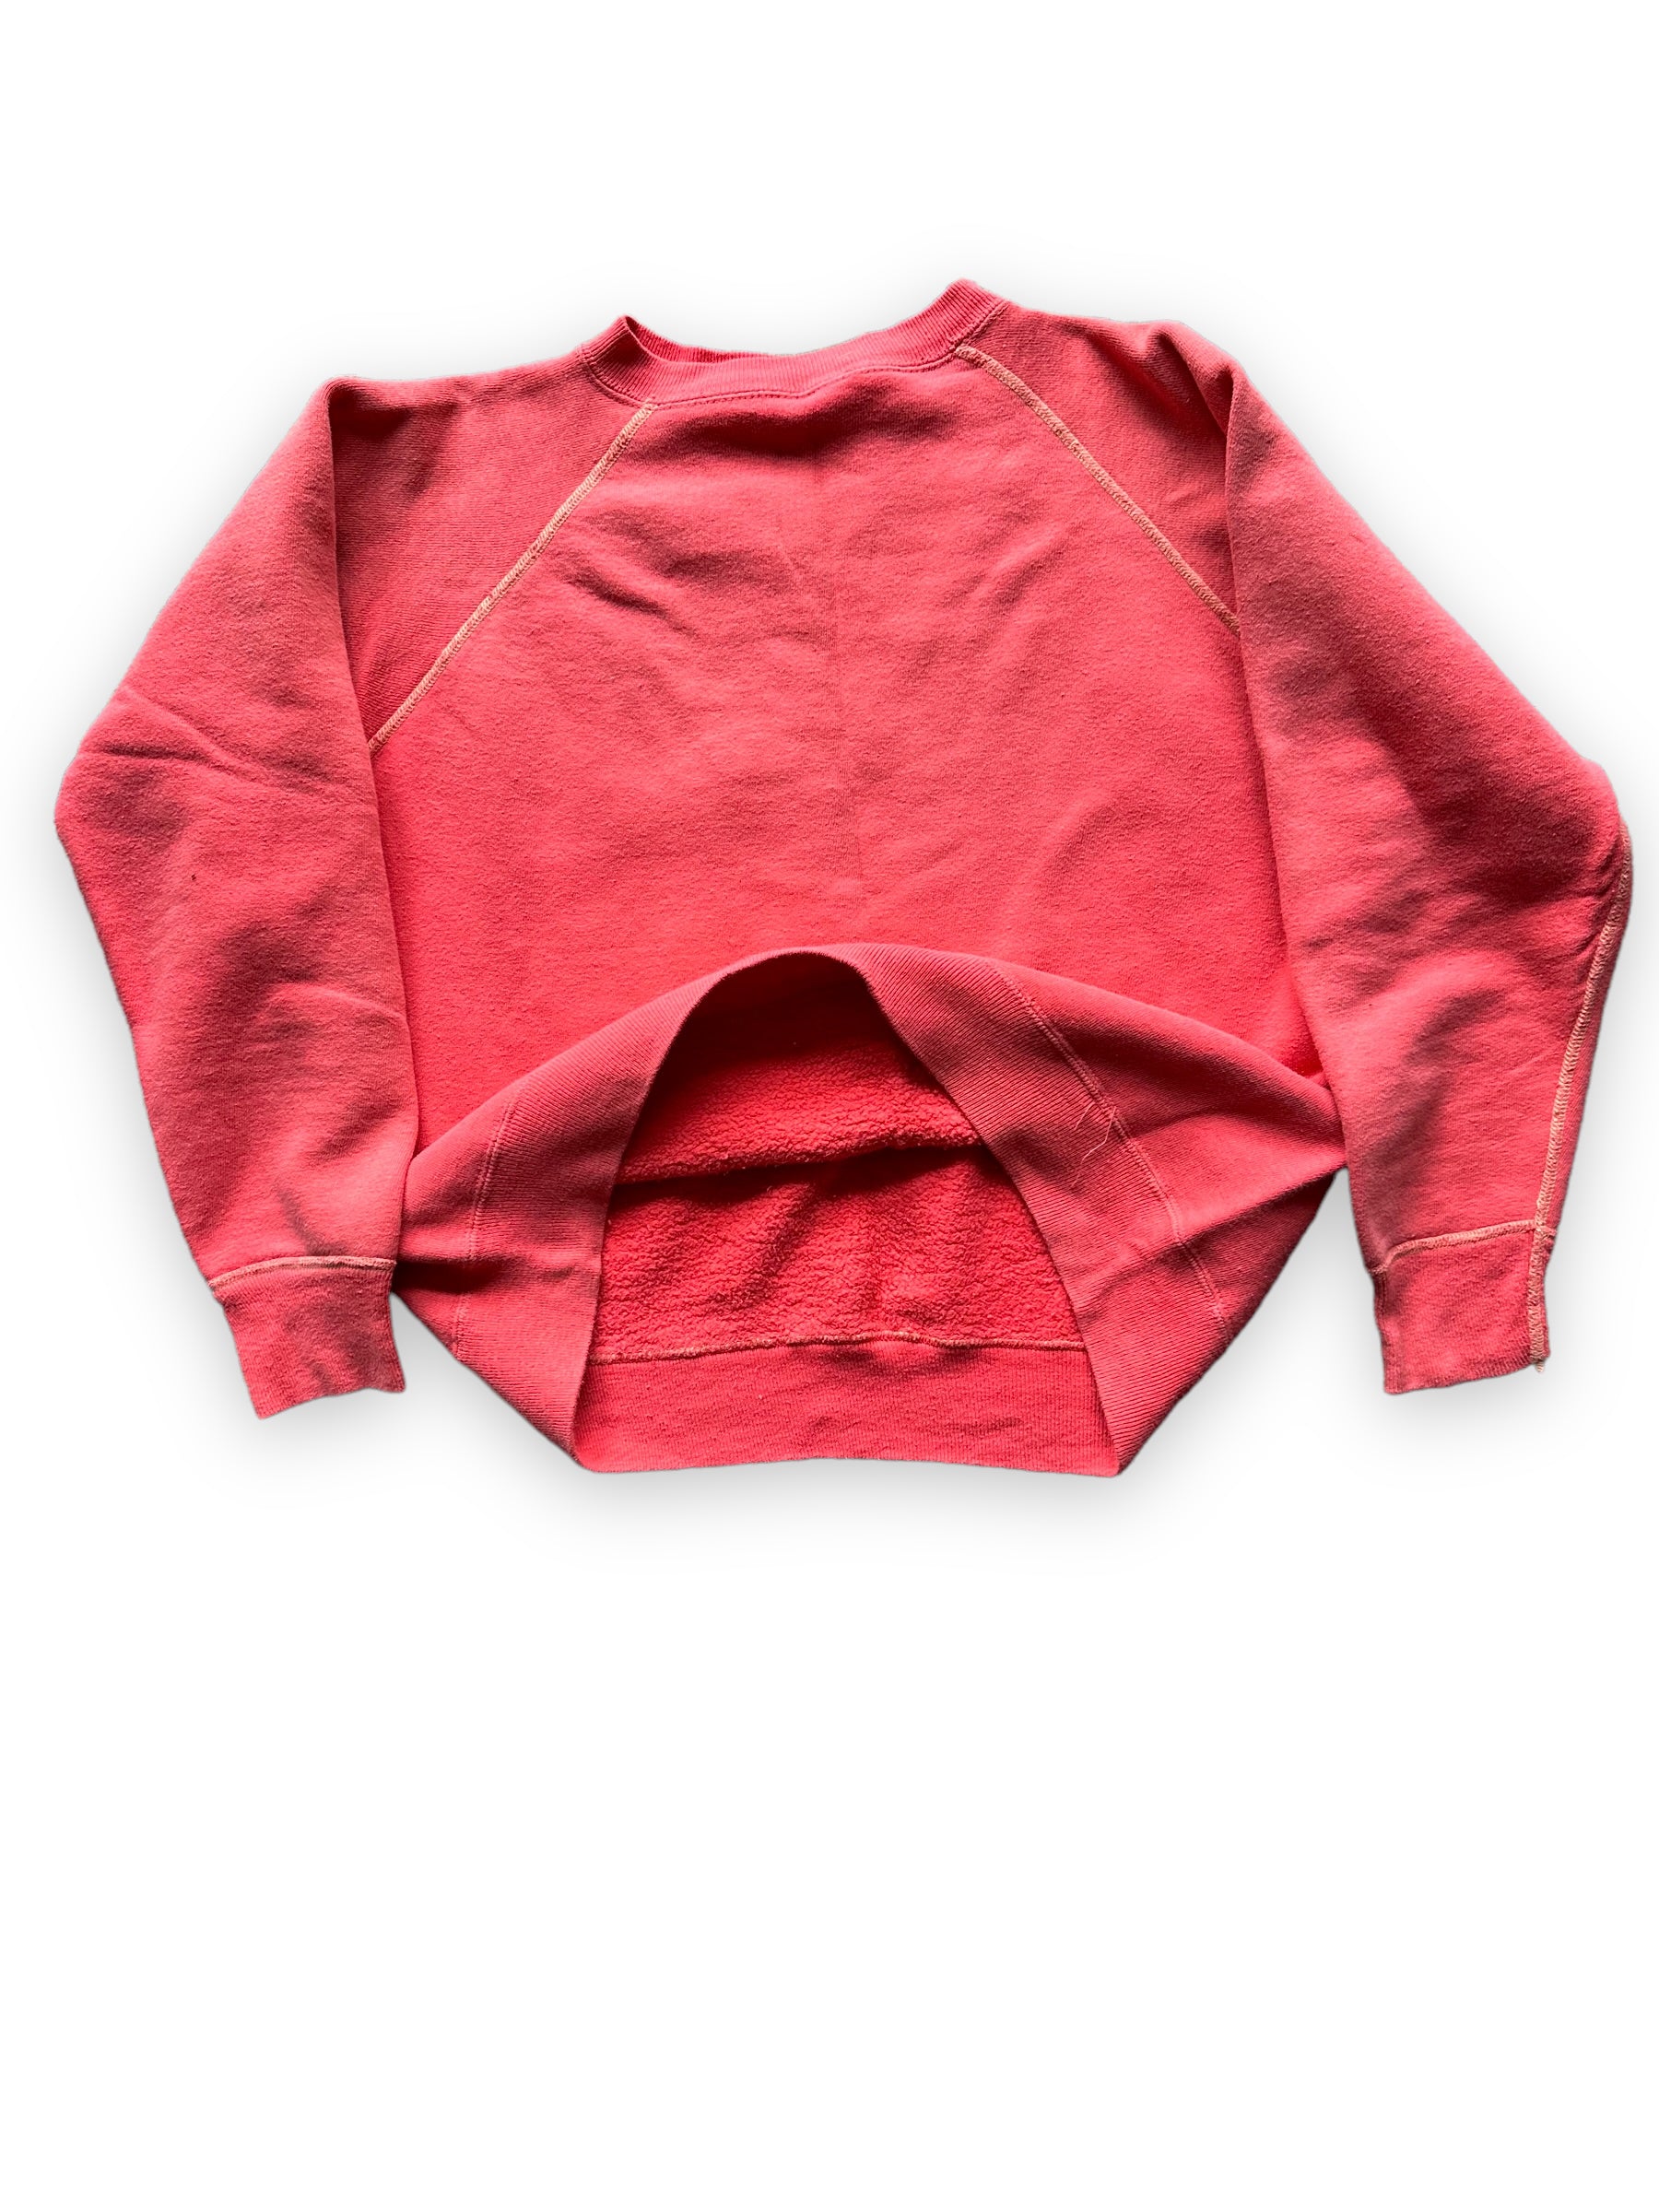 Inside View on Vintage Faded Red Crewneck Sweatshirt | Vintage Crewneck Sweatshirt Seattle | Barn Owl Vintage Clothing